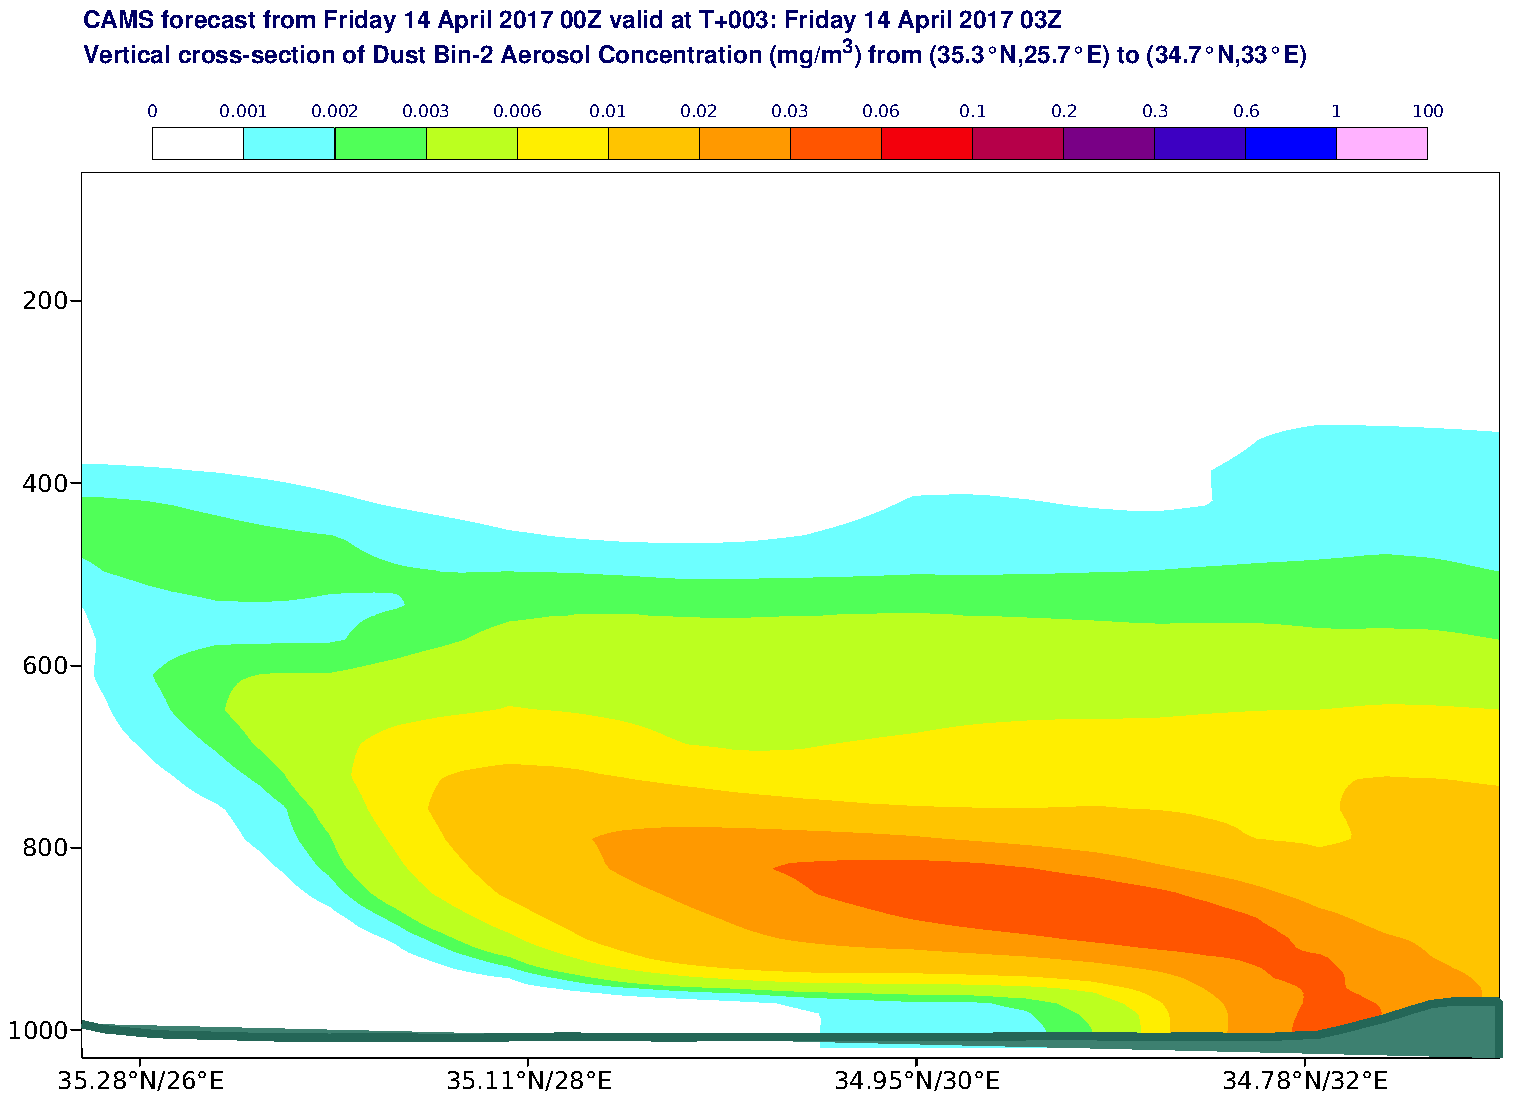 Vertical cross-section of Dust Bin-2 Aerosol Concentration (mg/m3) valid at T3 - 2017-04-14 03:00